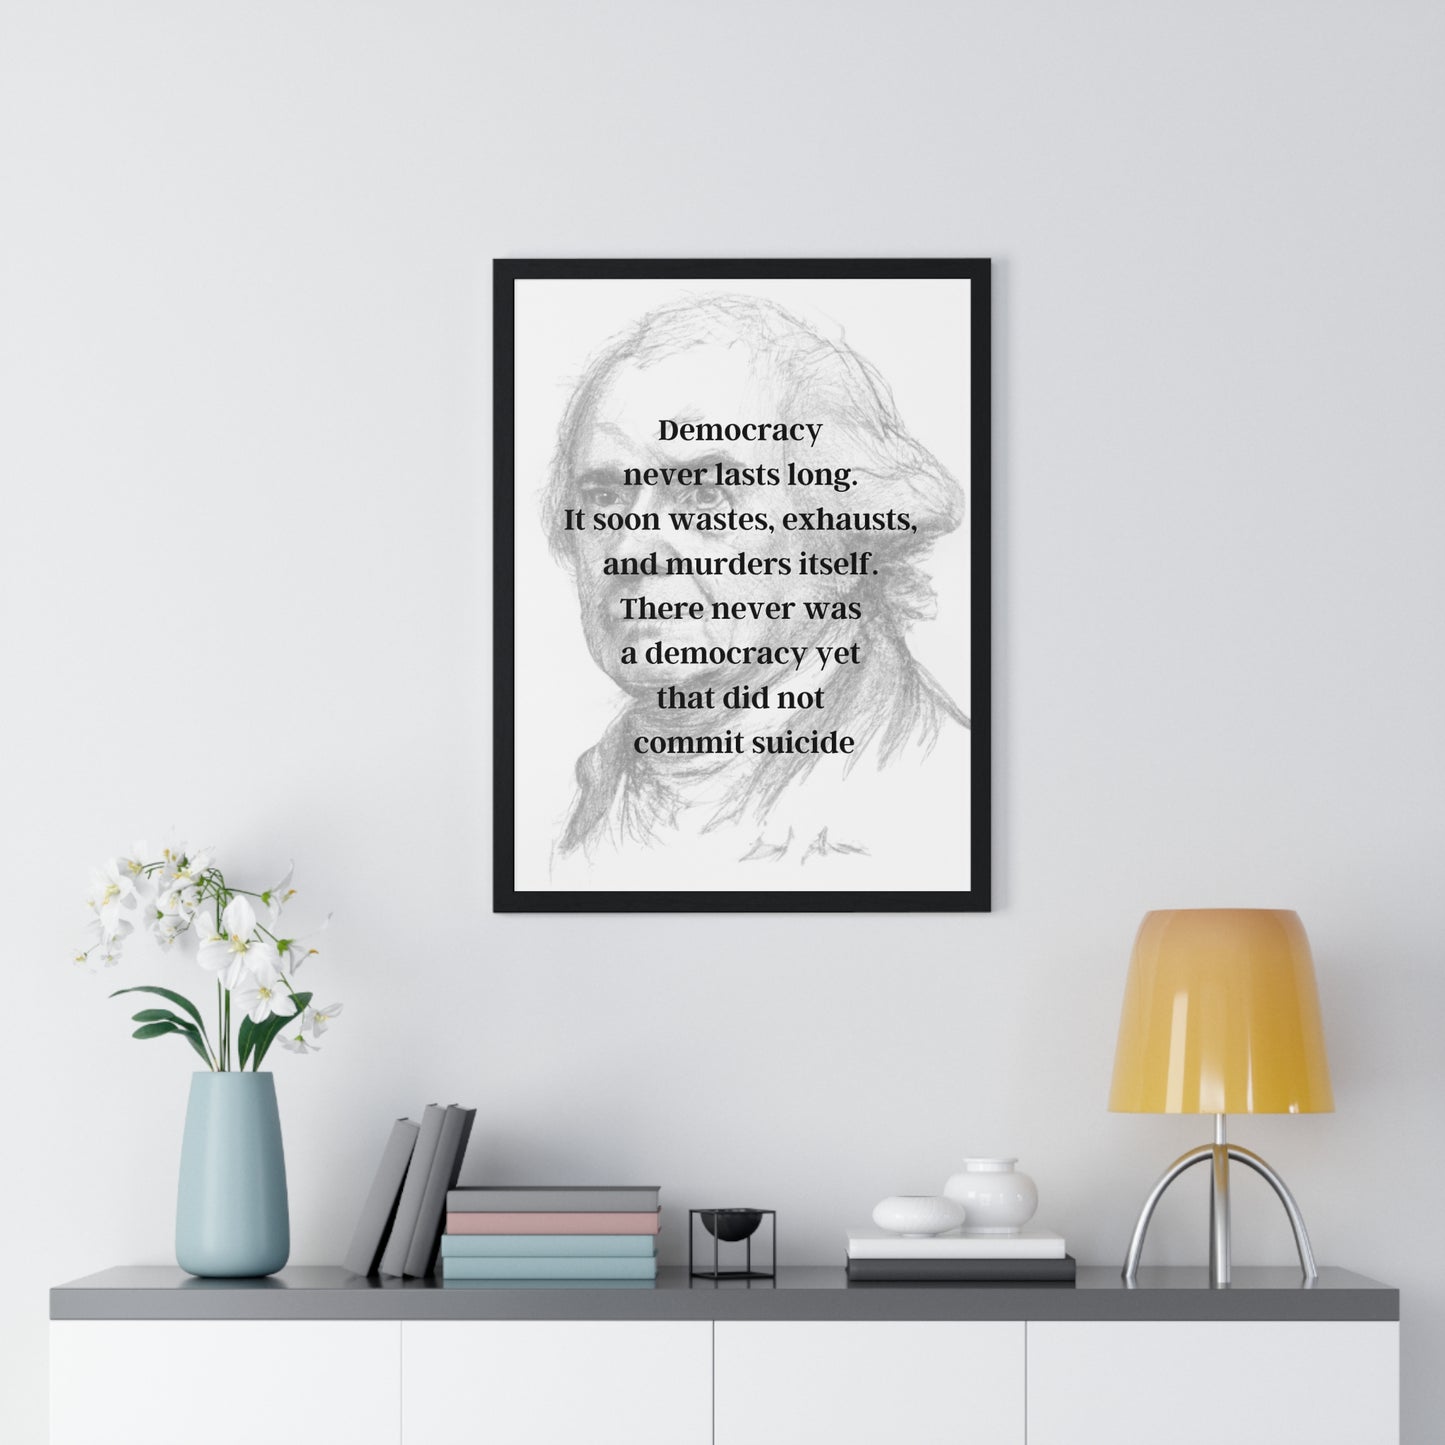 John Adams Quote 2, Poster Art, Light Print, 2nd President of the United States, American Patriots, AI Art, Political Art, Poster Prints, Presidential Portraits, Presidential Quotes, Inspirational Quotes